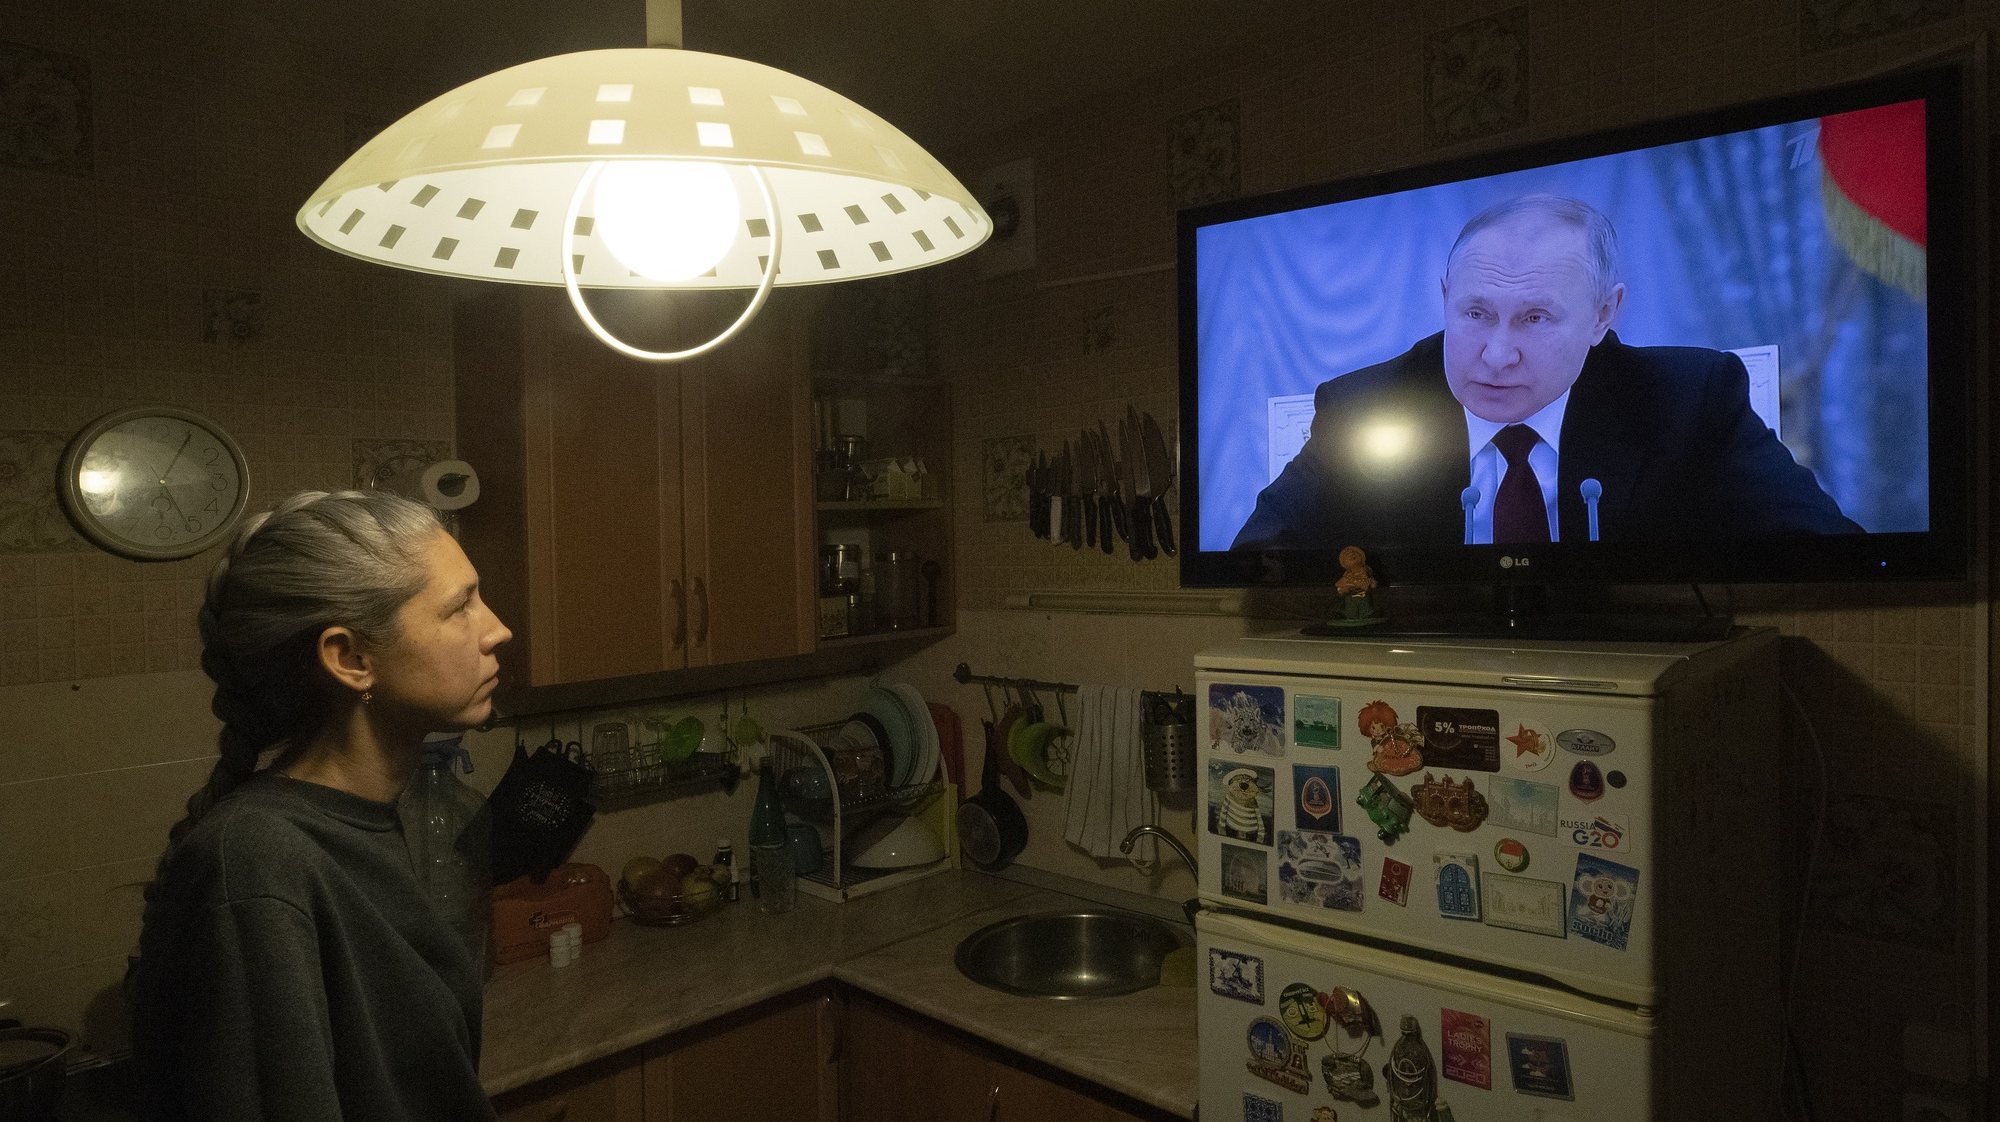 epa09840174 (FILE) - A woman watches TV with Russian President Putin speaking during a broadcast of a meeting of the National Security Council on the recognition of the self-proclaimed Donetsk People&#039;s Republic (DPR) and the Luhansk People&#039;s Republic (LPR), in St. Petersburg, Russia, 21 February 2022 (issued 21 March 2022). Putin said he was considering a request from leaders of the two self-proclaimed republics to recognise them as independent states, less than a week after the Duma on 15 February voted to appeal to President Putin to recognise the two Donbas regions. The regions declared independence in 2014 amid an armed conflict in the eastern Ukraine.  EPA/Anatoly Maltsev  ATTENTION: This Image is part of a PHOTO SET *** Local Caption *** 57496979